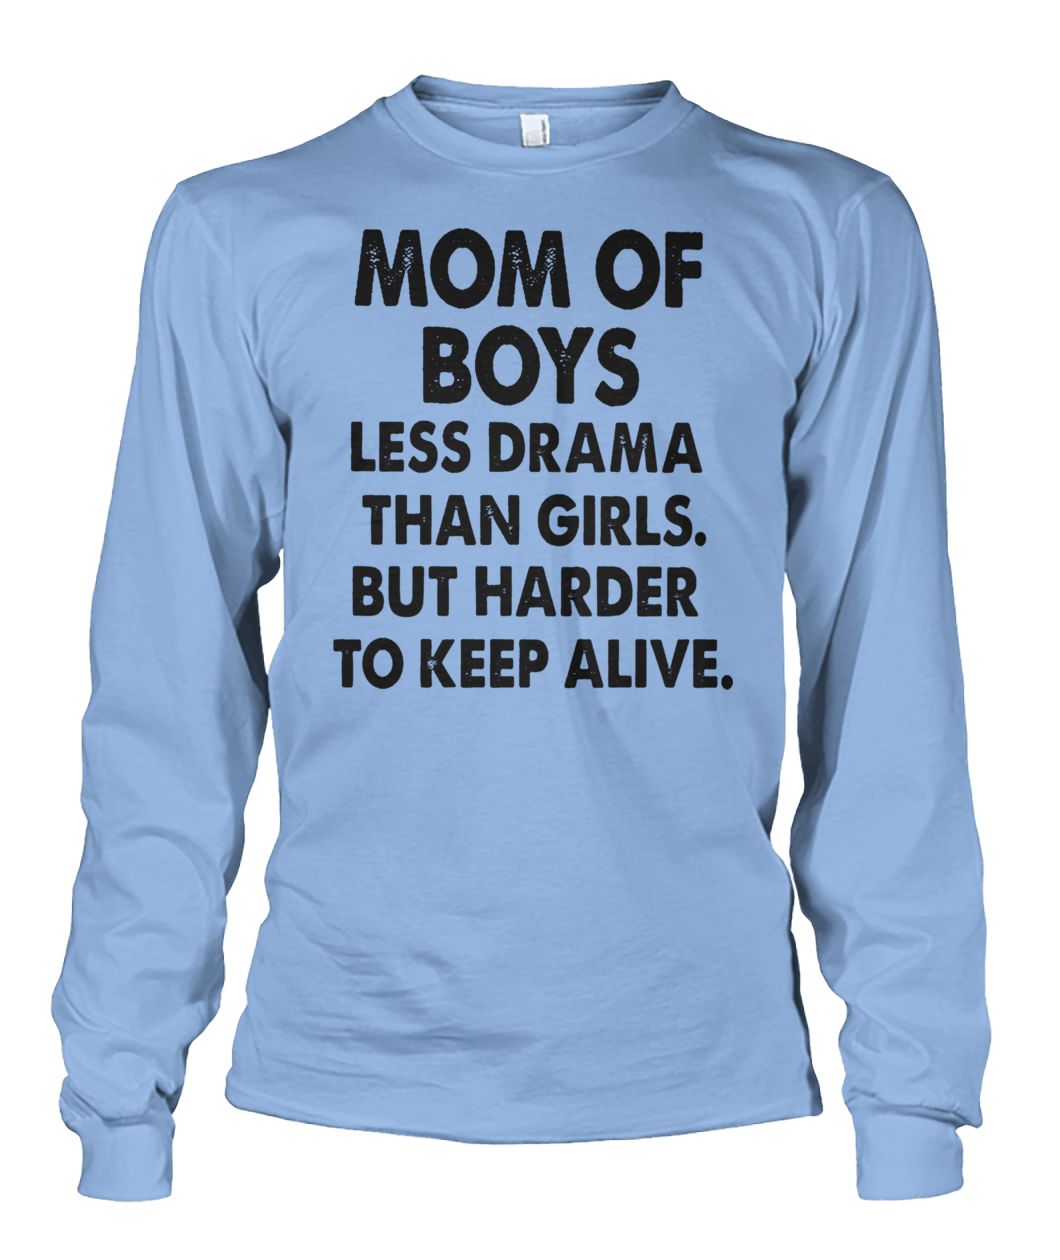 Mom of boys less drama than girls but harder to keep alive long sleeve